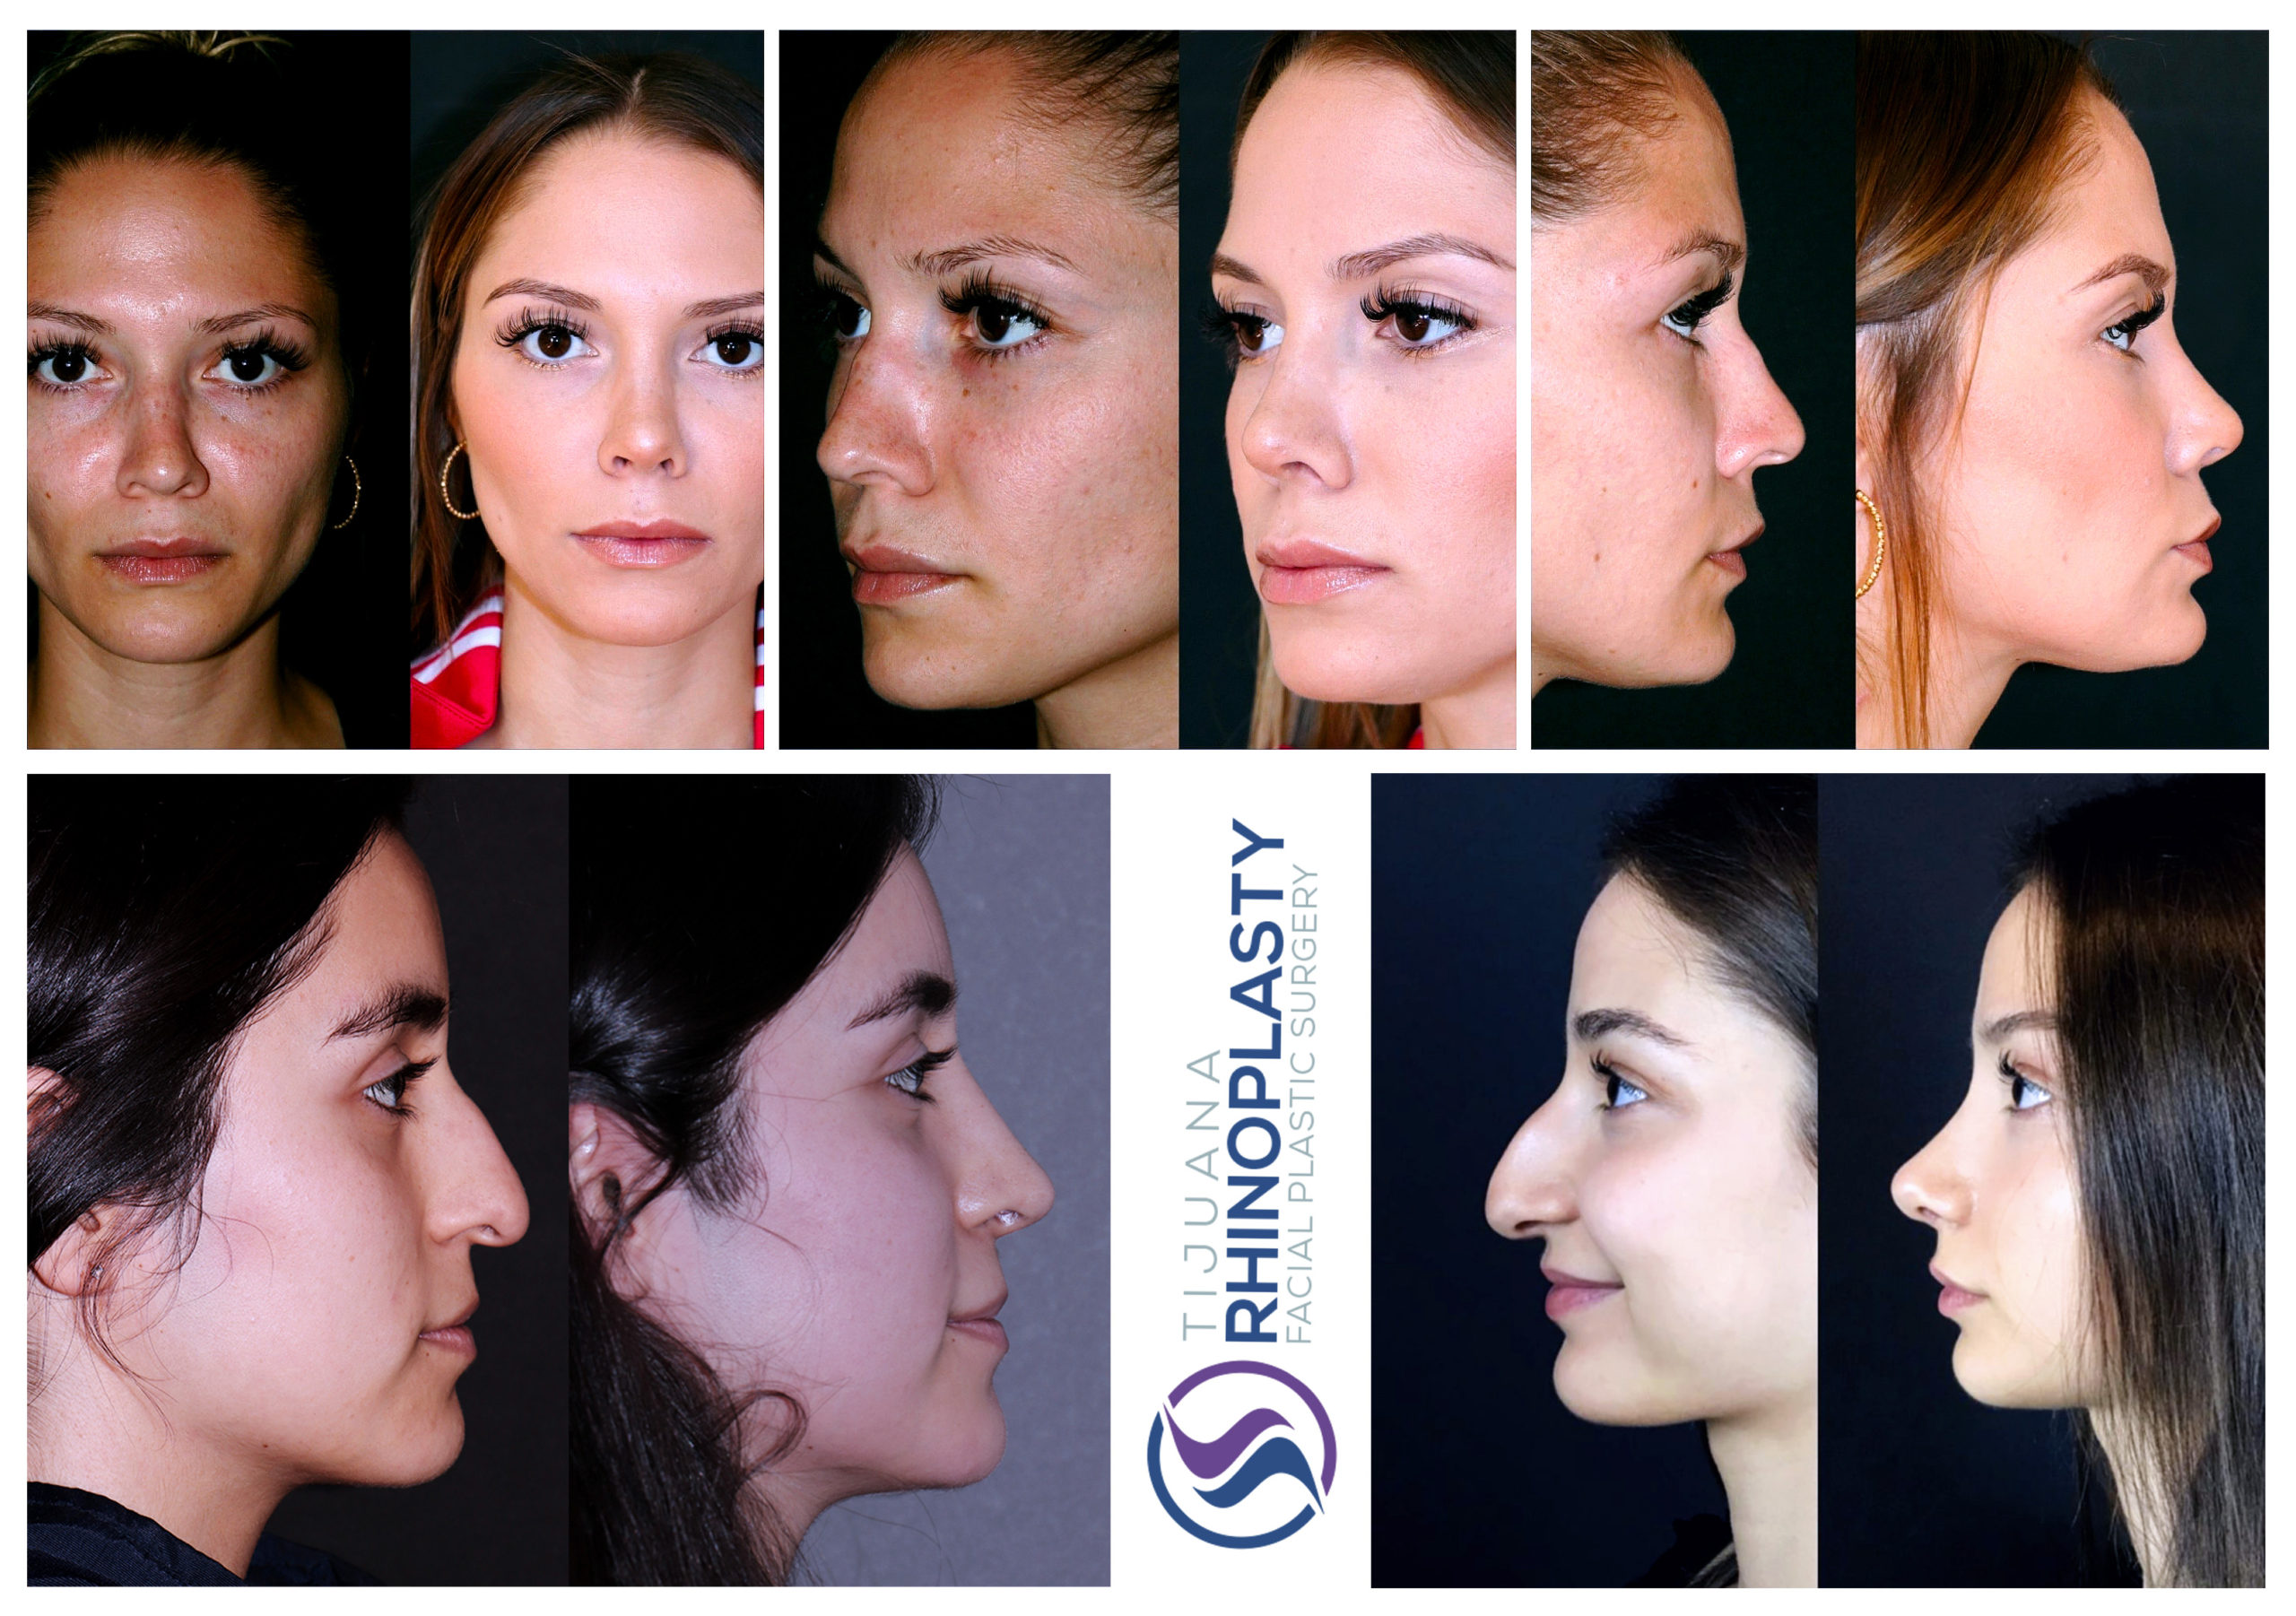 Tijuana Rhinoplasty in Tijuana, Mexico, is dedicated exclusively to facial plastic surgery. Dr. Edgar Eduardo Santos specializes in a wide variety of facial cosmetic and reconstructive procedures, including rhinoplasty and revision rhinoplasty.